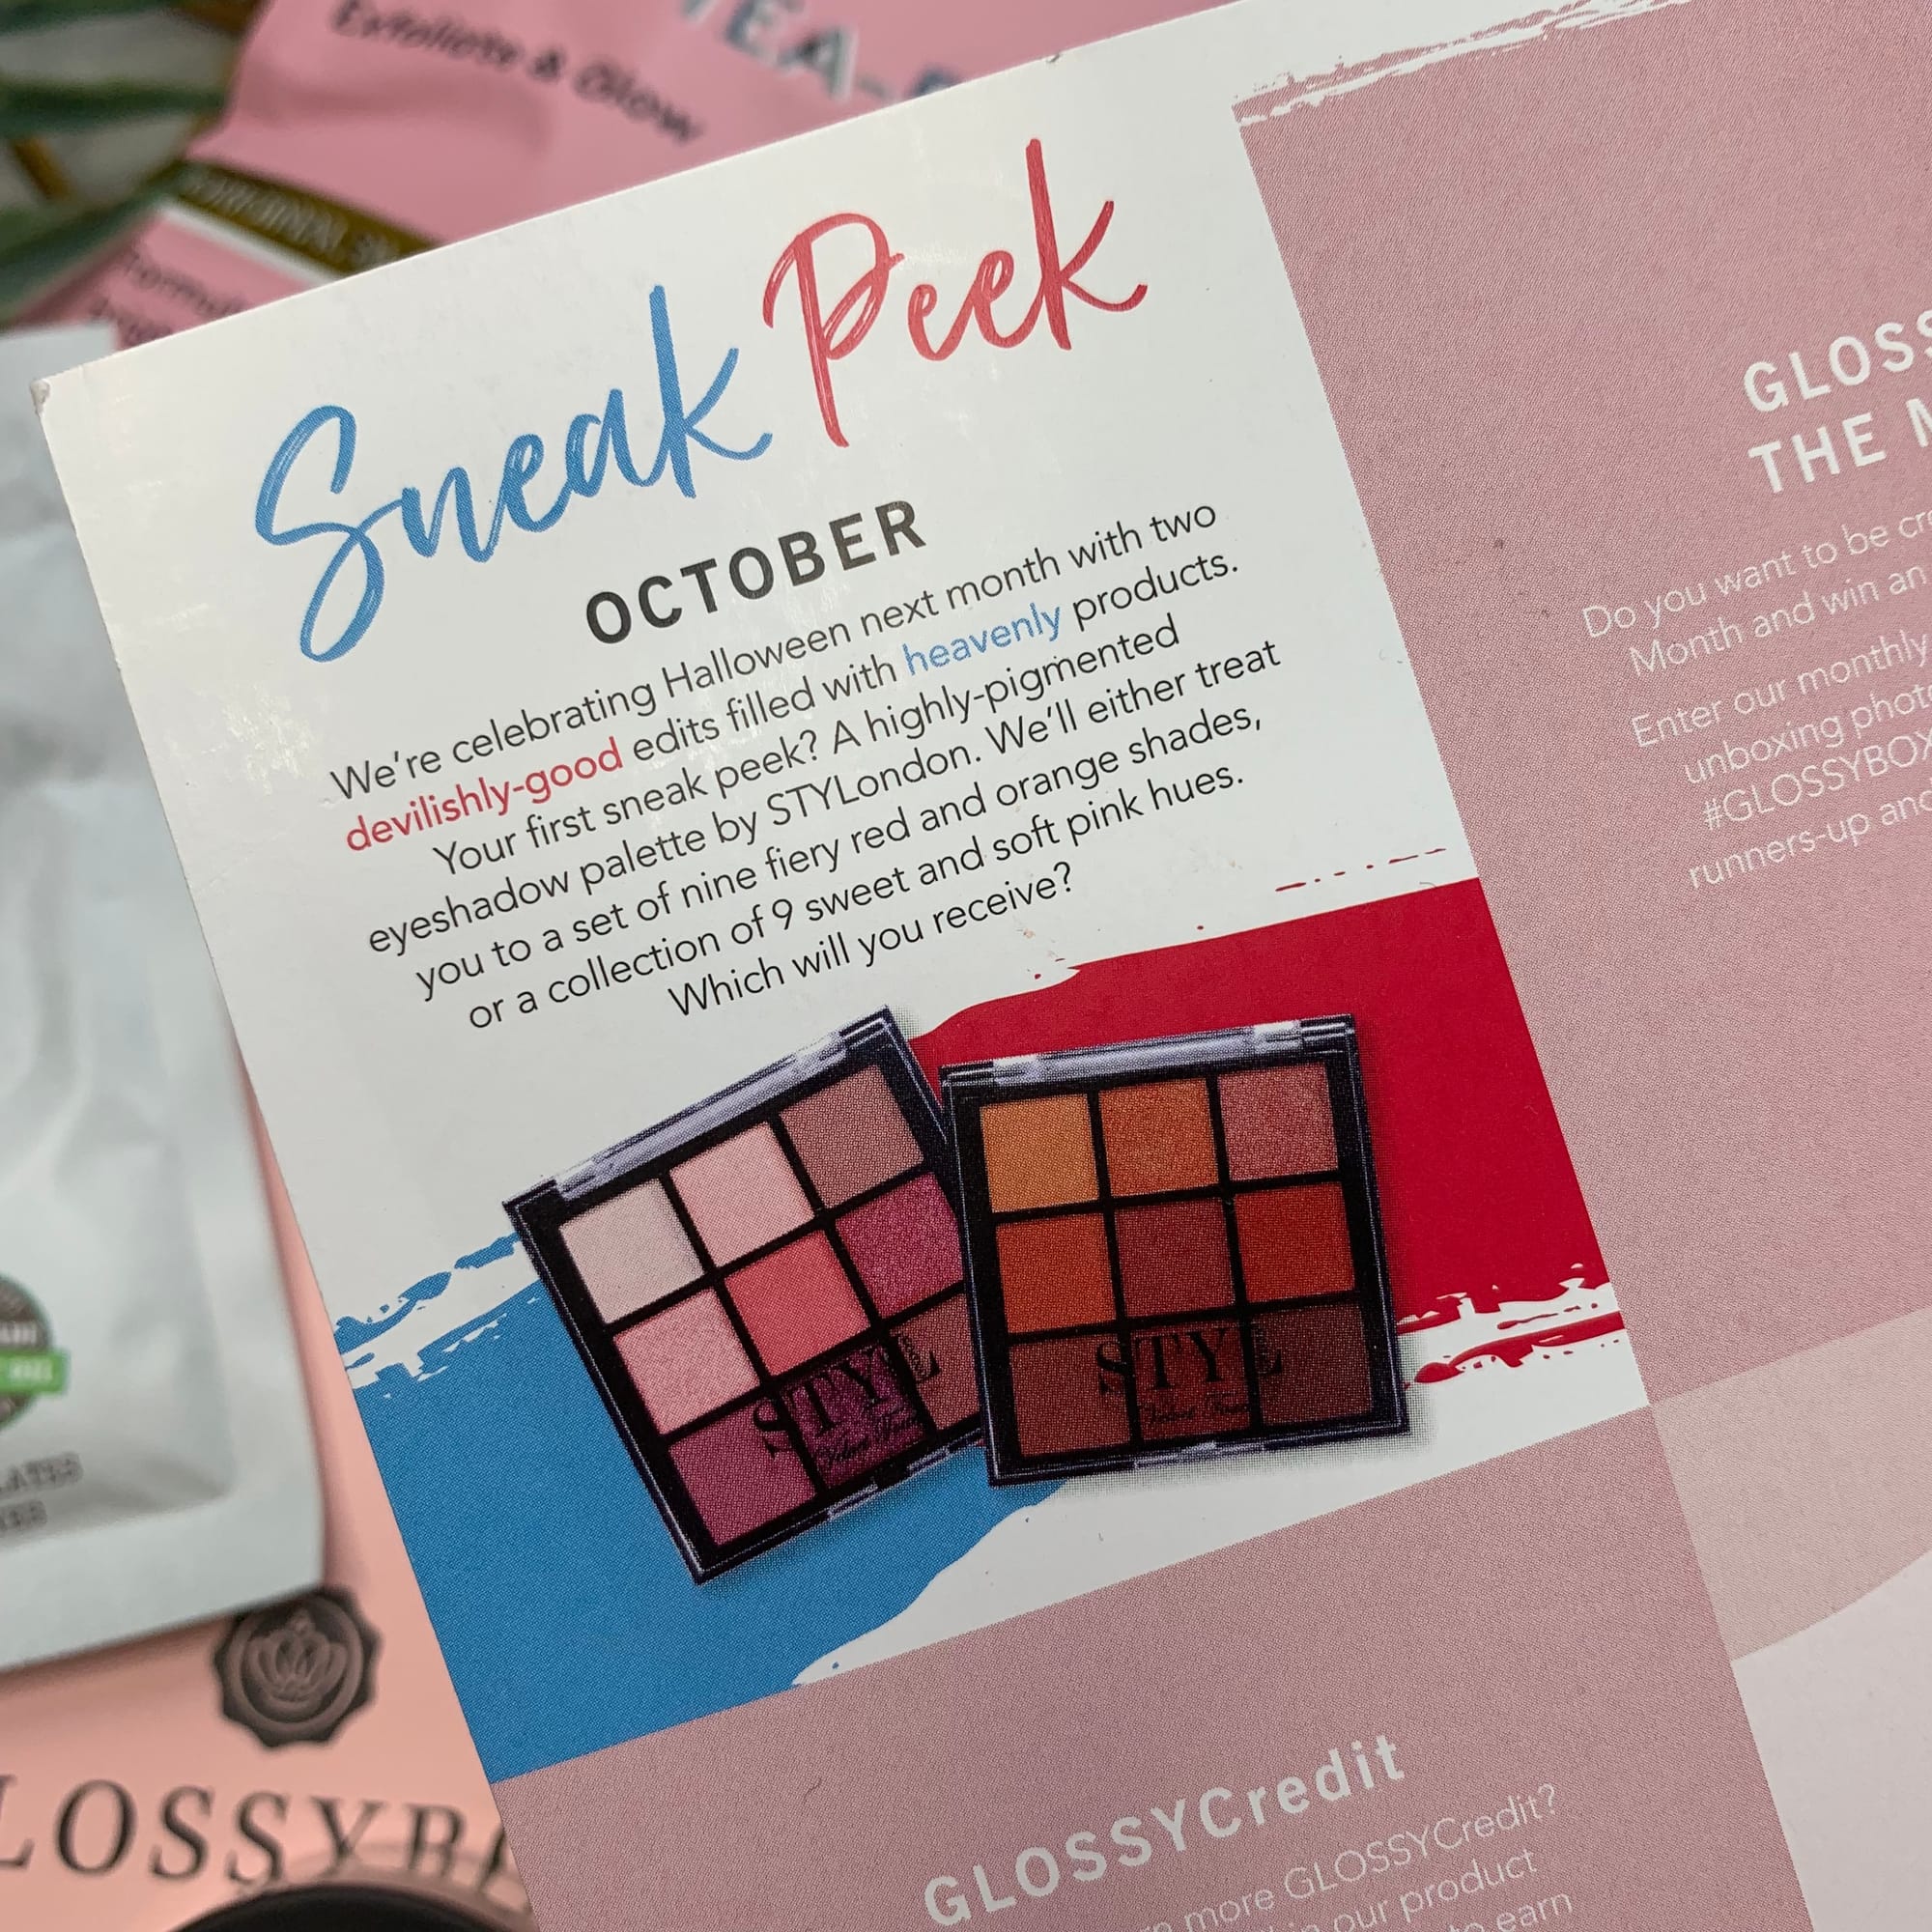 Sneak Peek into October Glossybox  - Glossybox September 2019 Delicious Beauty - Miss Boux